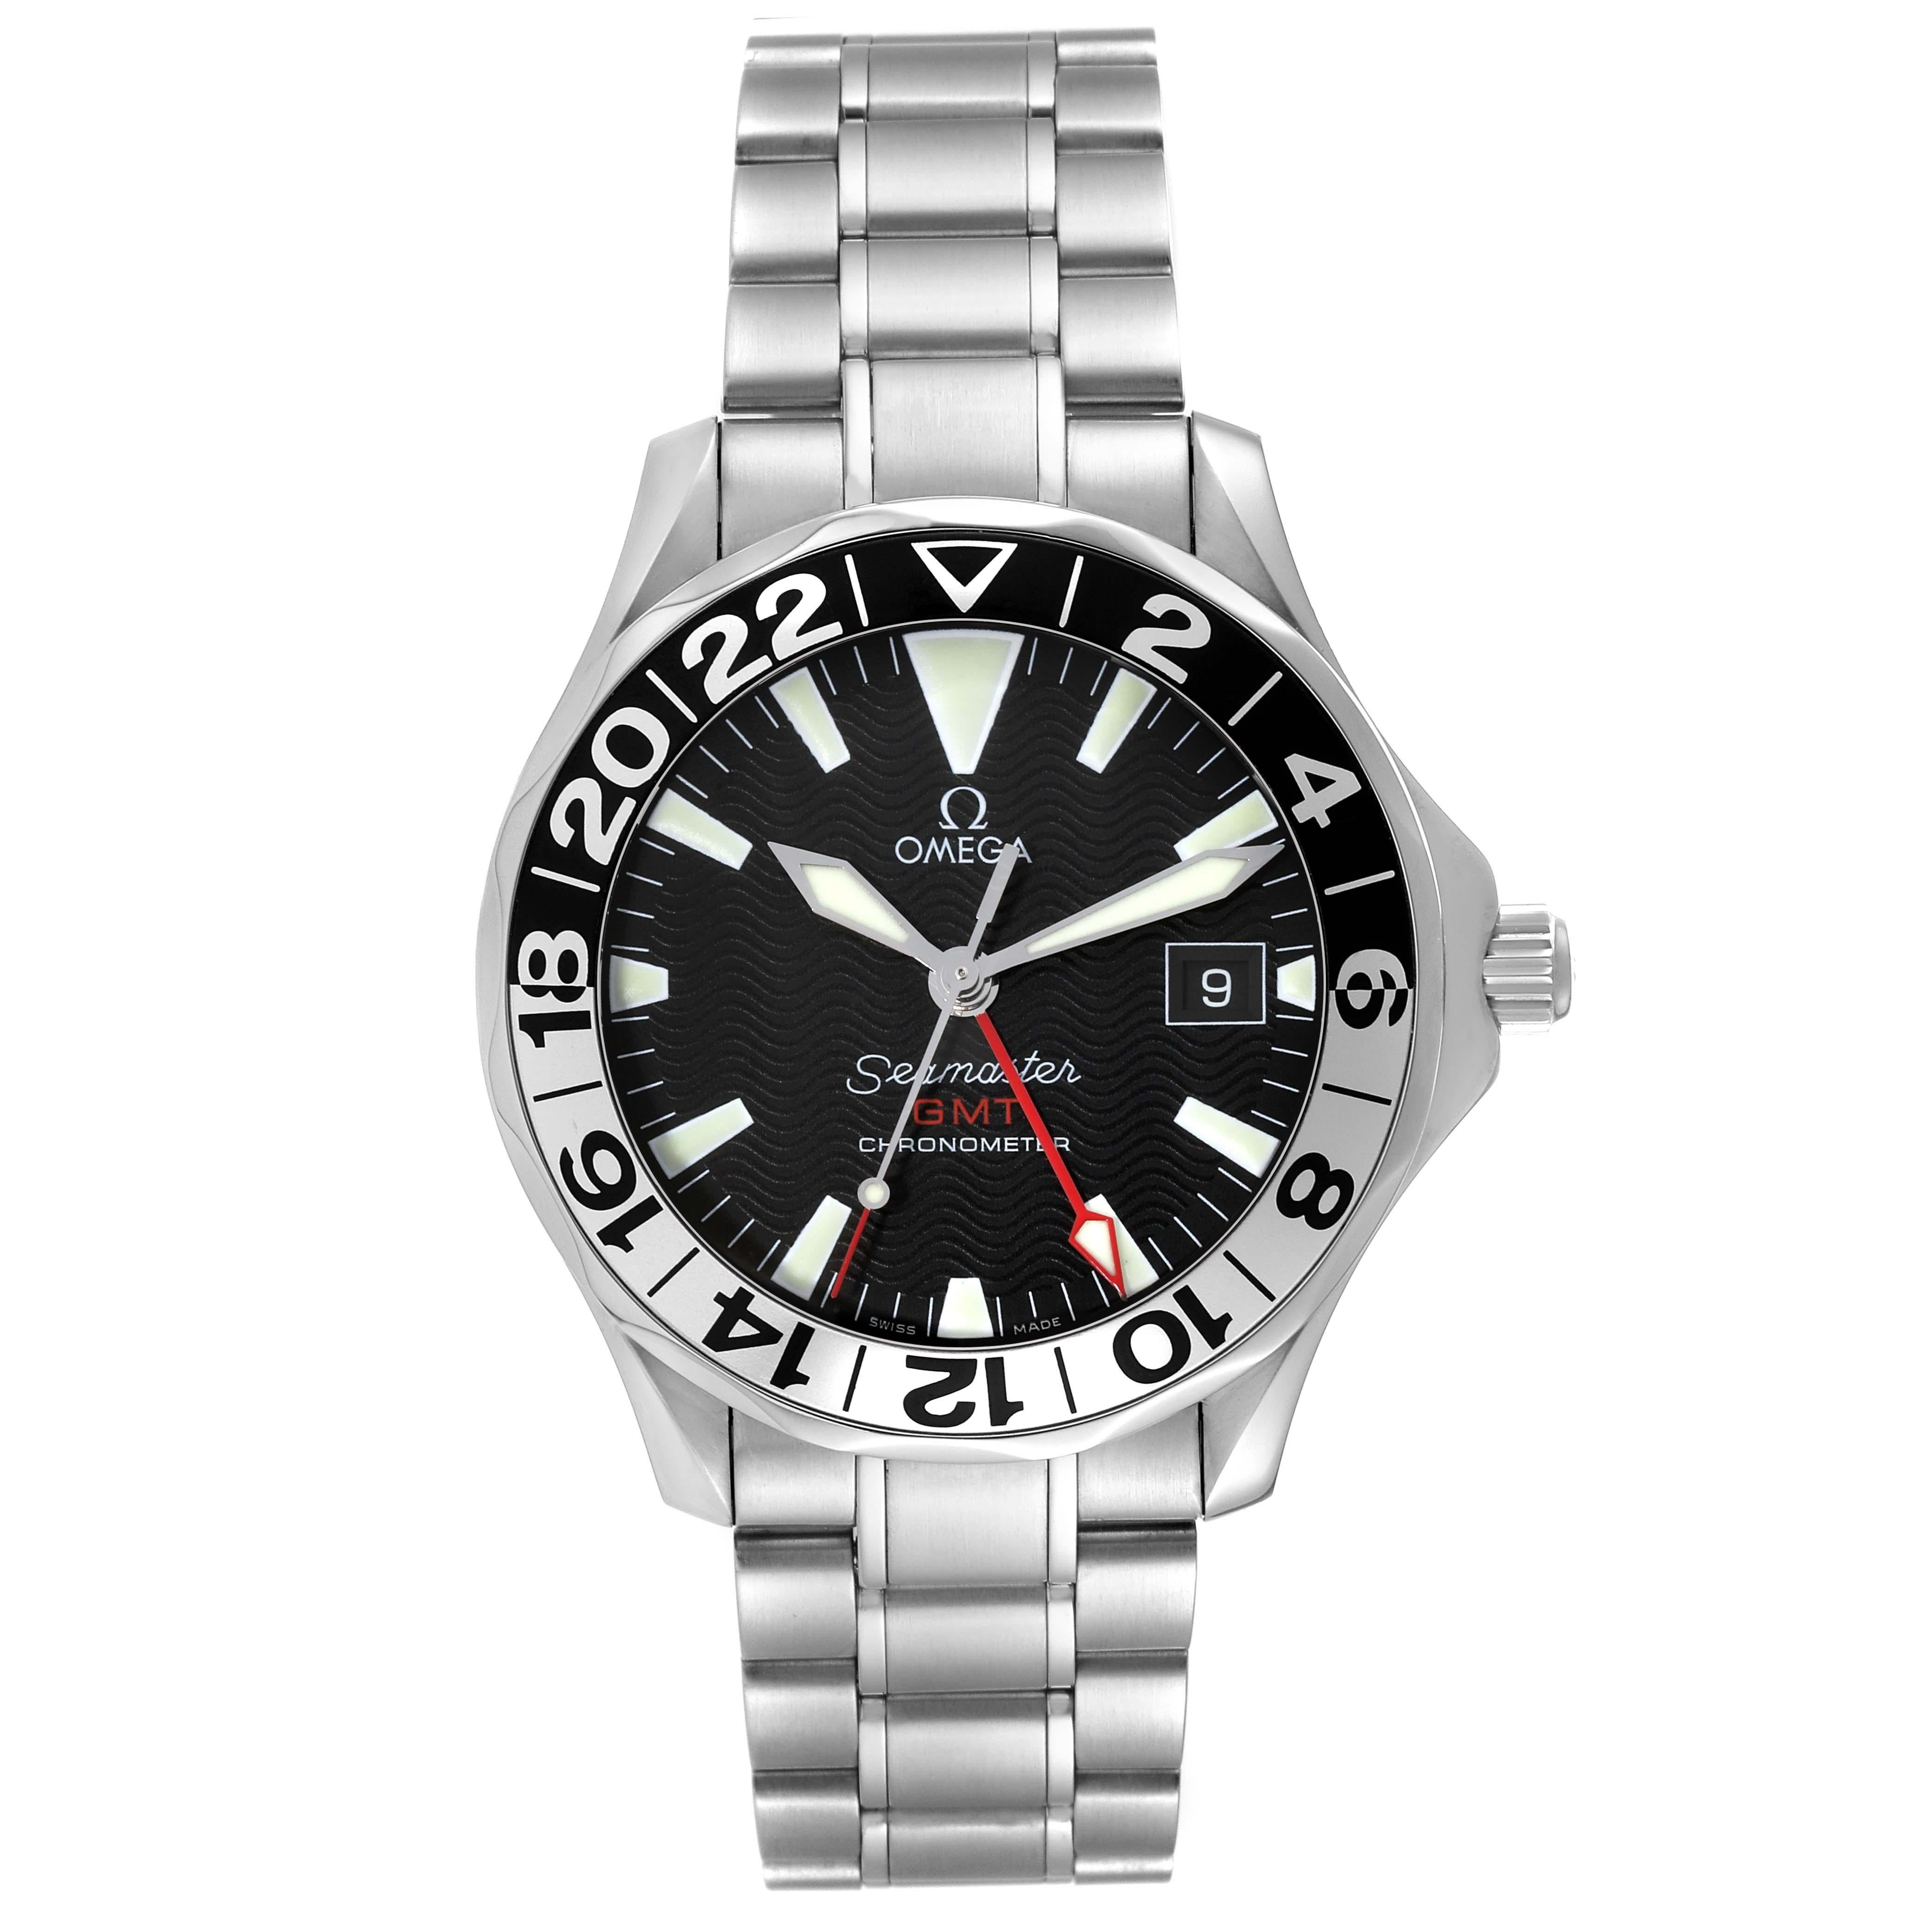 Omega Seamaster GMT 50th Anniversary Steel Mens Watch 2234.50.00 Box Card. Officially certified chronometer automatic self-winding GMT movement. Brushed and polished stainless steel case 41.0 mm in diameter. Omega logo on the crown. Black and silver